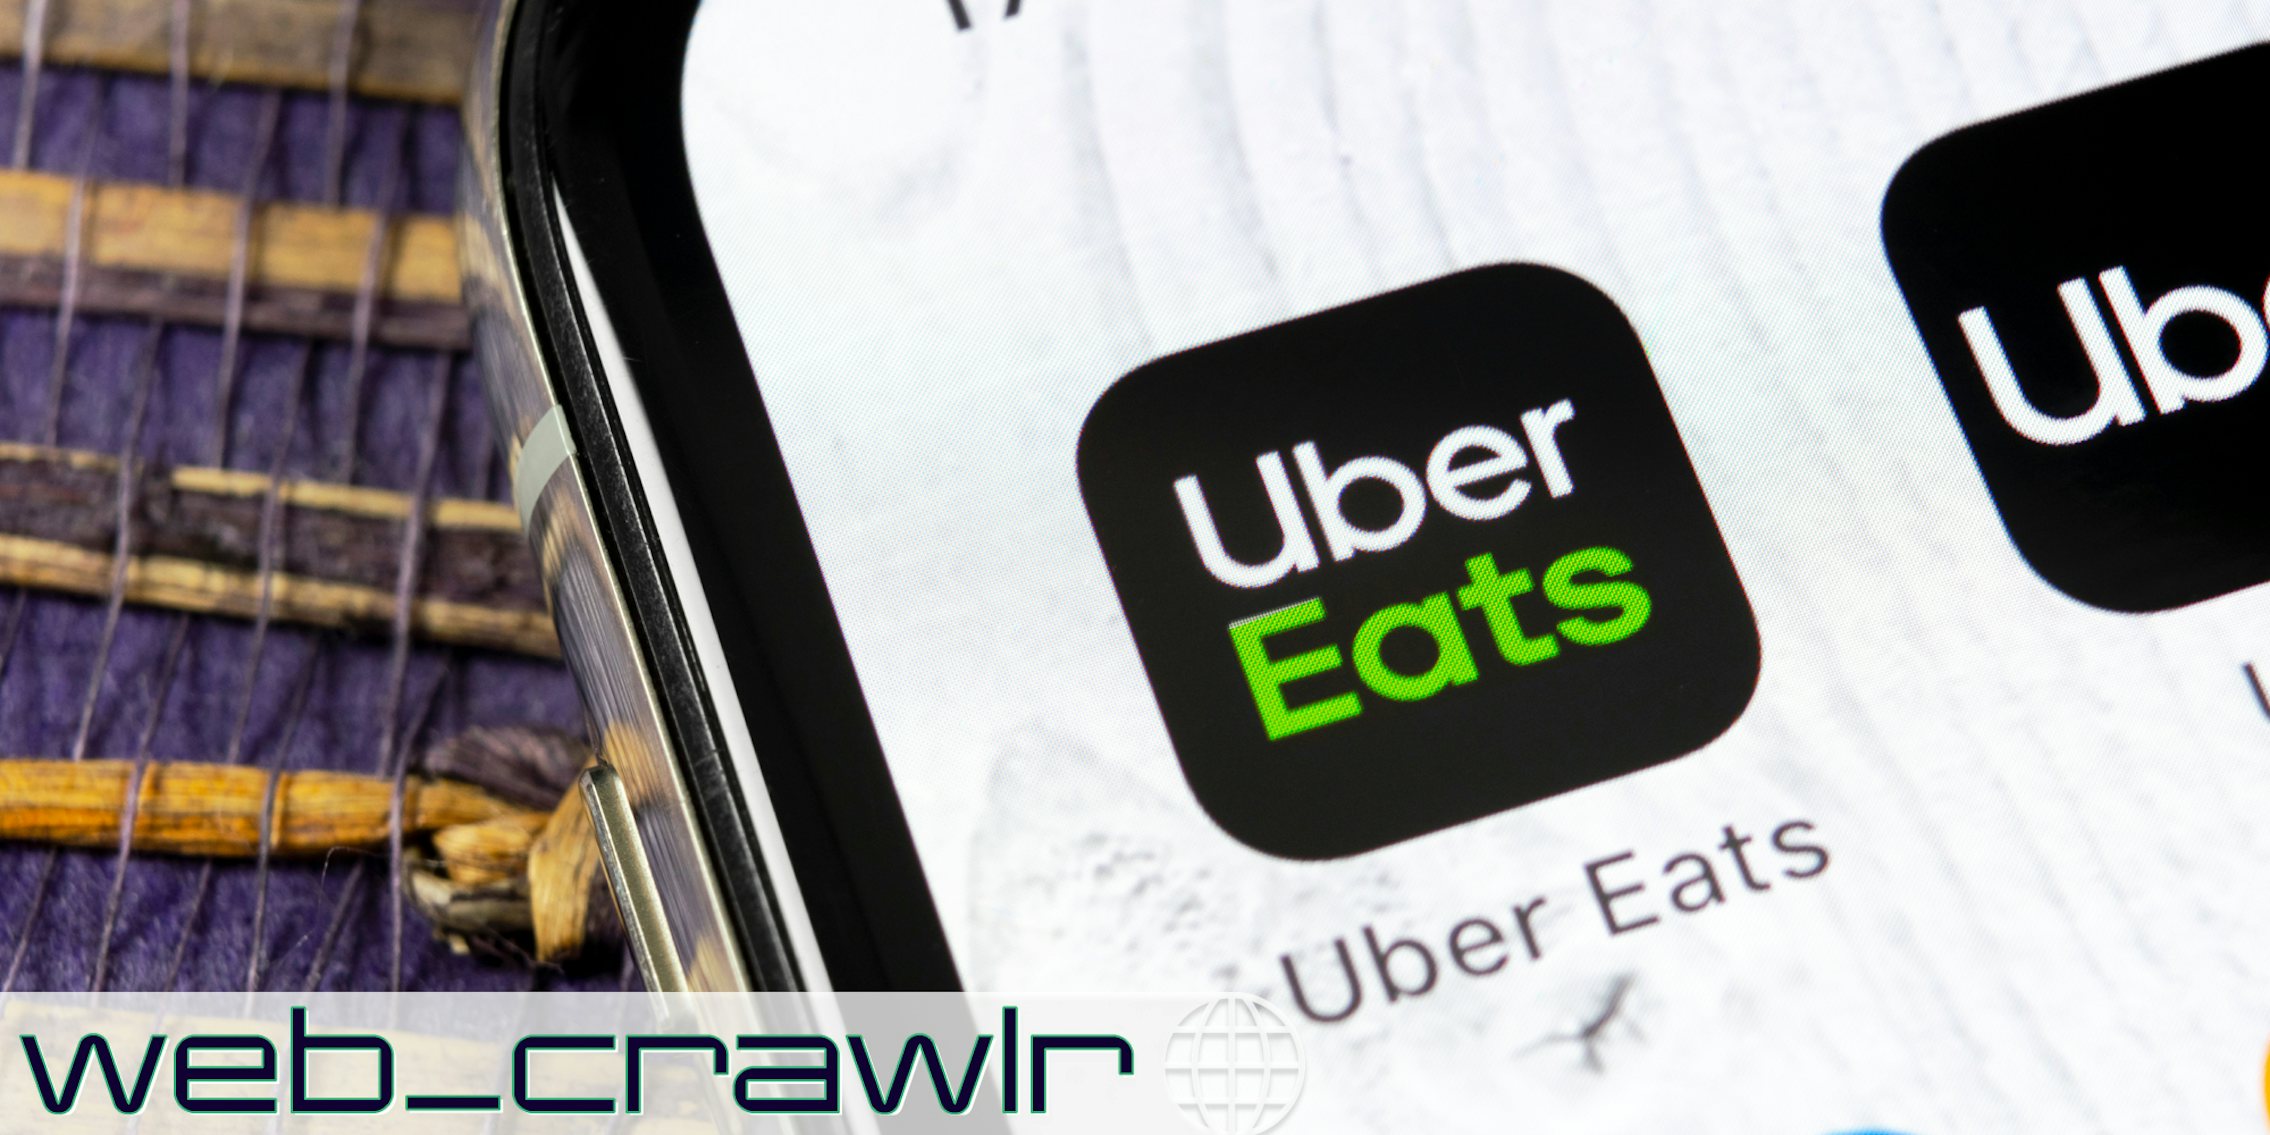 A phone showing an Uber Eats app. The Daily Dot newsletter web_crawlr logo is in the bottom left corner.